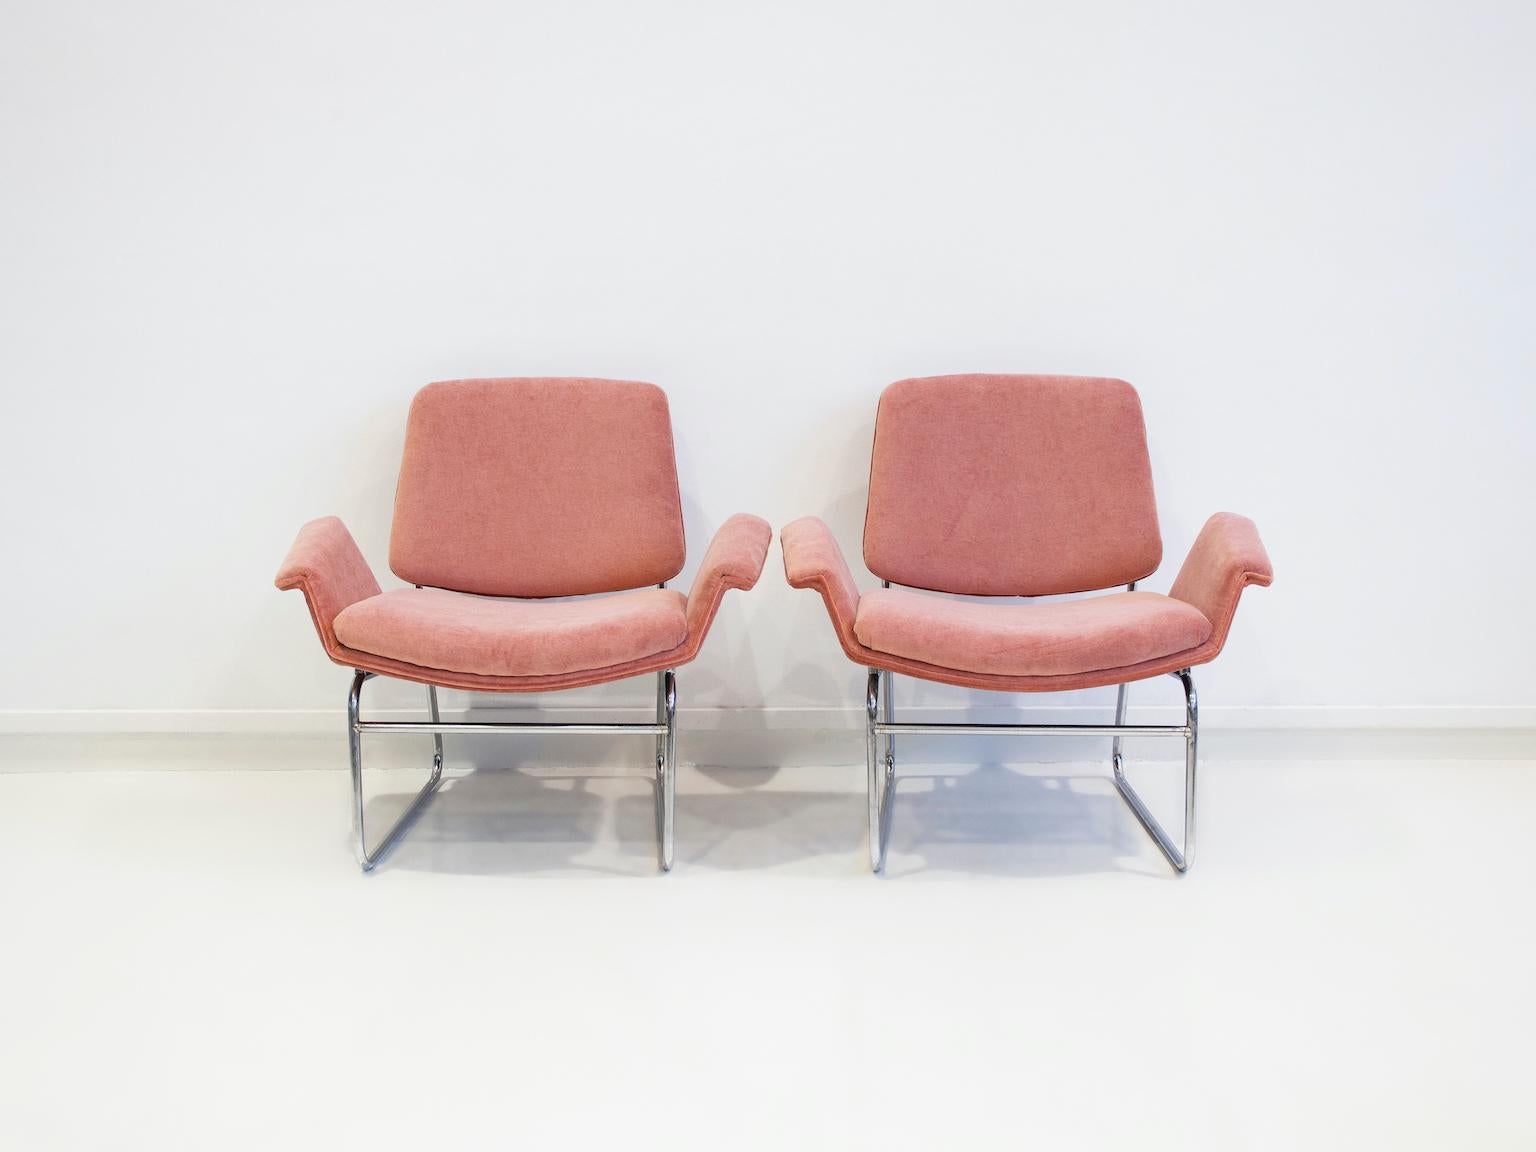 Pair of lounge chairs by Arflex, Italy. Model 'Double-shell' designed in 1960 by Danish designer Illum Wikkelsø. Chromed steel structure with some signs of age-related wear, reupholstered in pink velvet fabric.